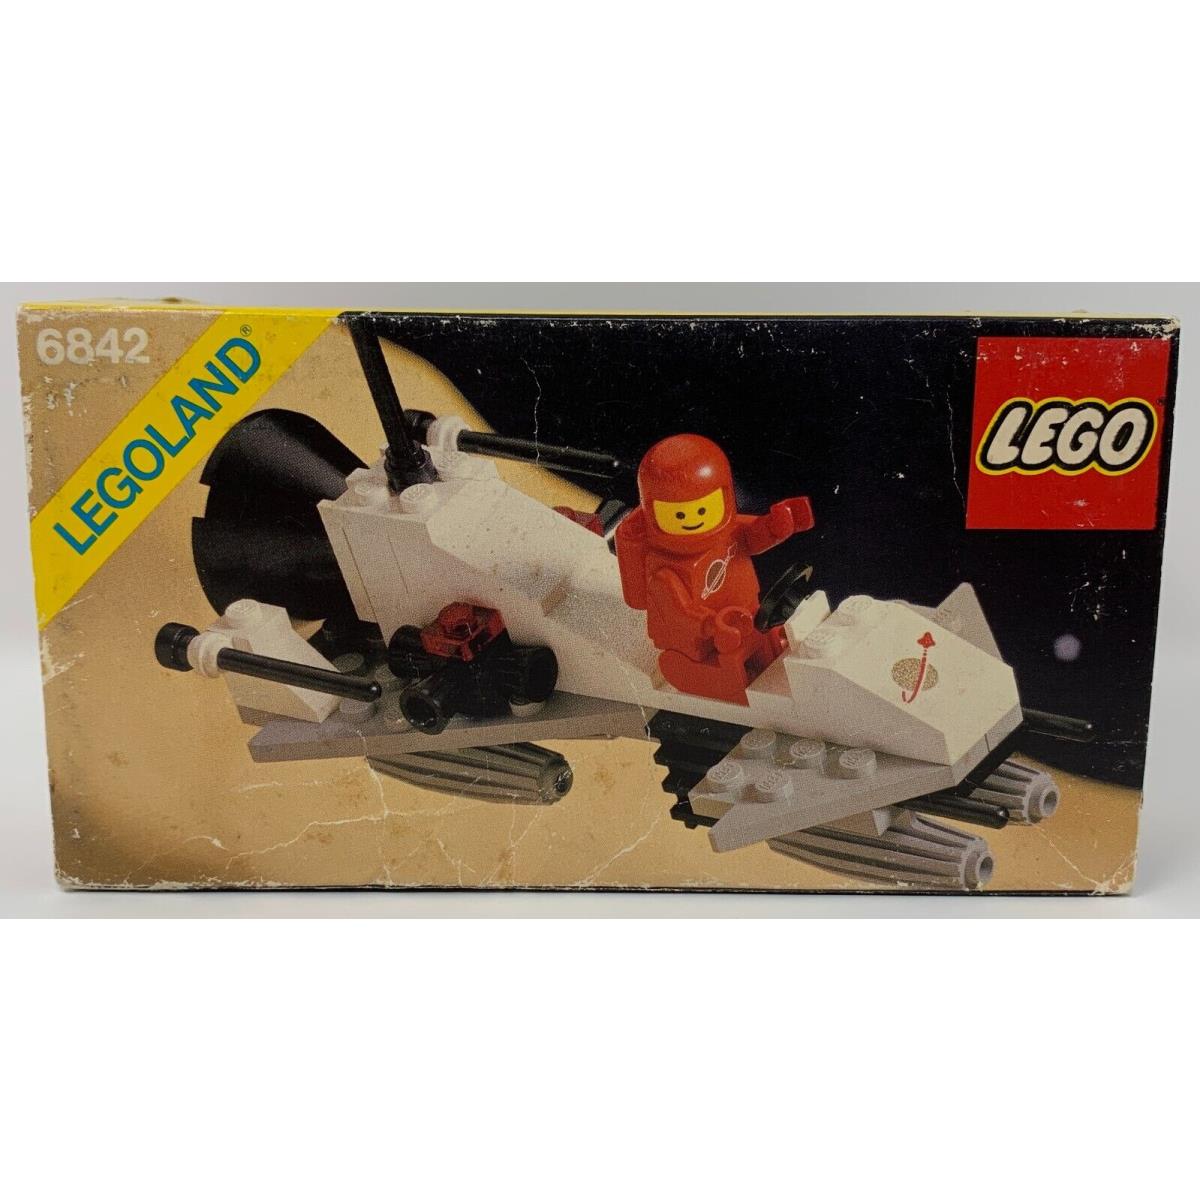 Lego 6842 Small Space Shuttle Craft 1981